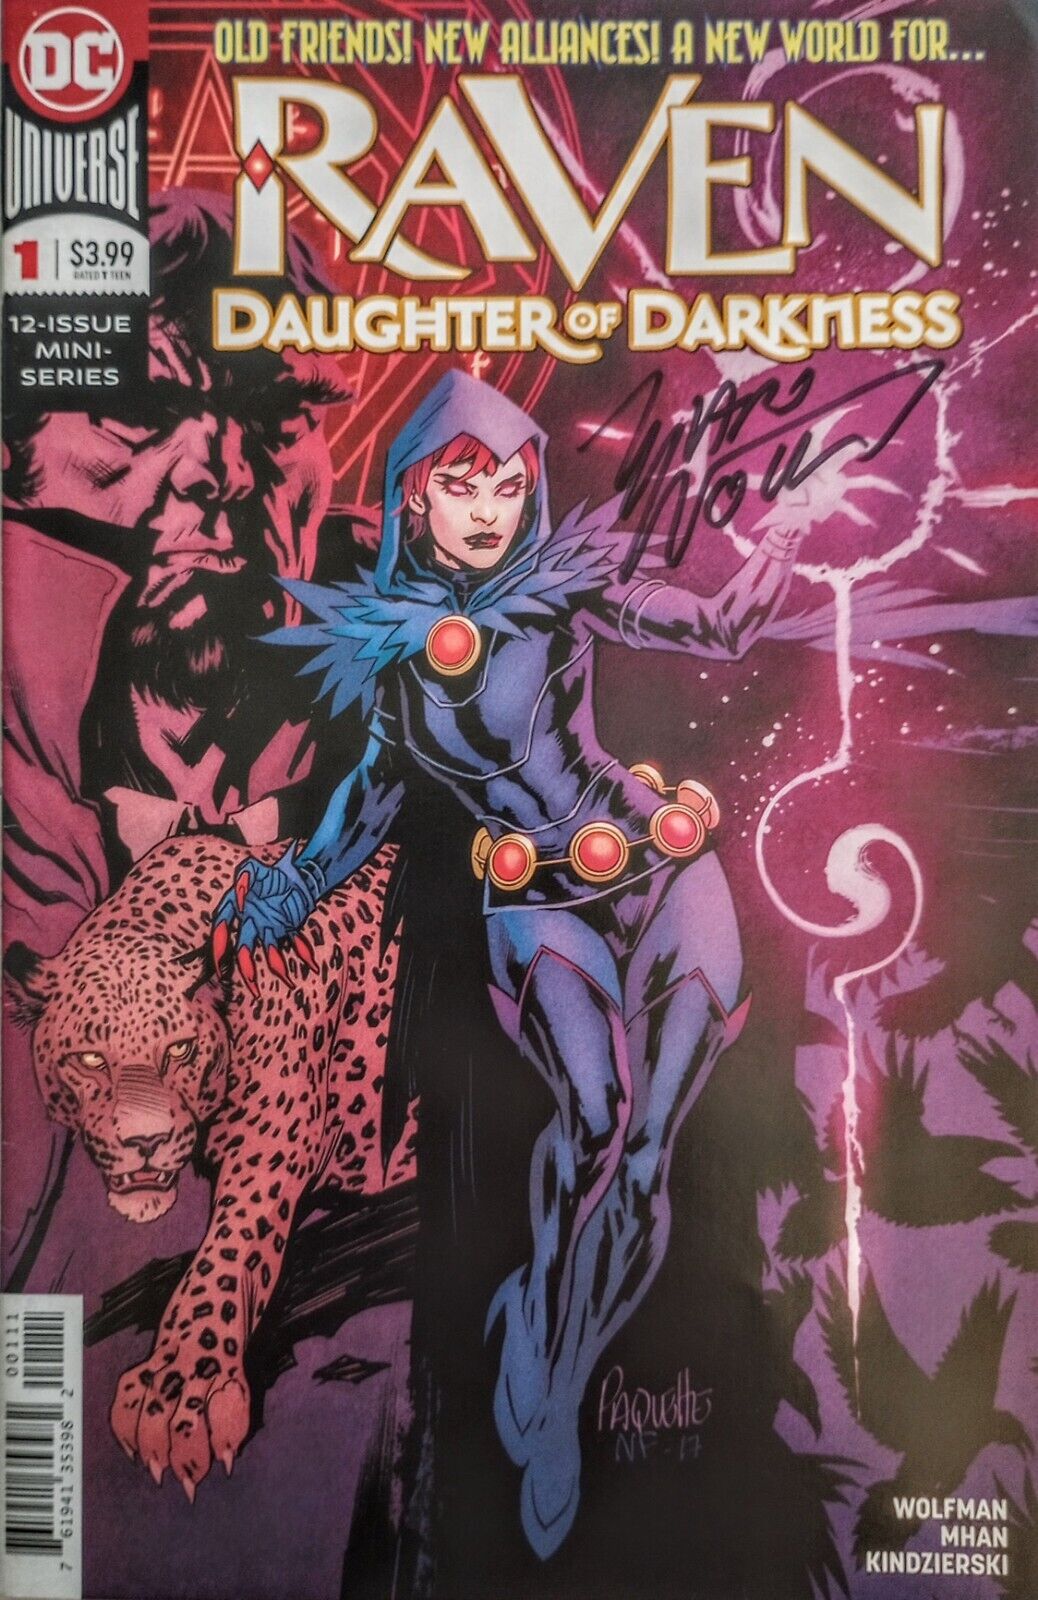 Signed by Marv Wolfman Raven: Daughter of Darkness Vol. 1- 2018, Trade Paperback